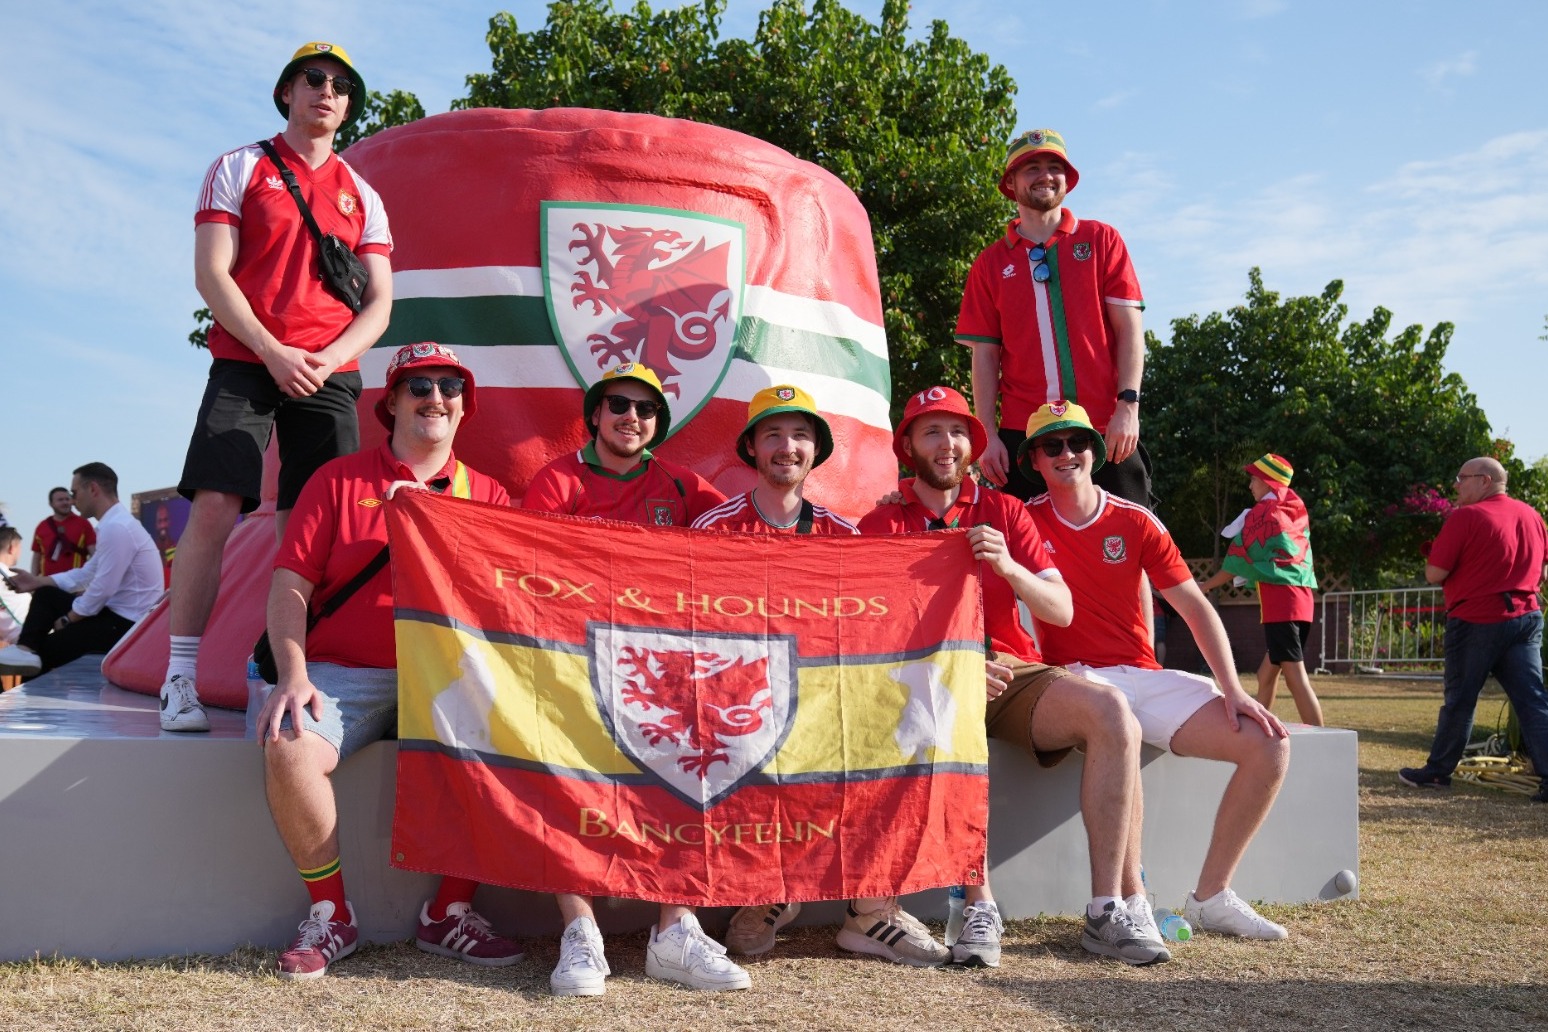 Rainbow hats and flags get go ahead as Wales and England seek World Cup progress